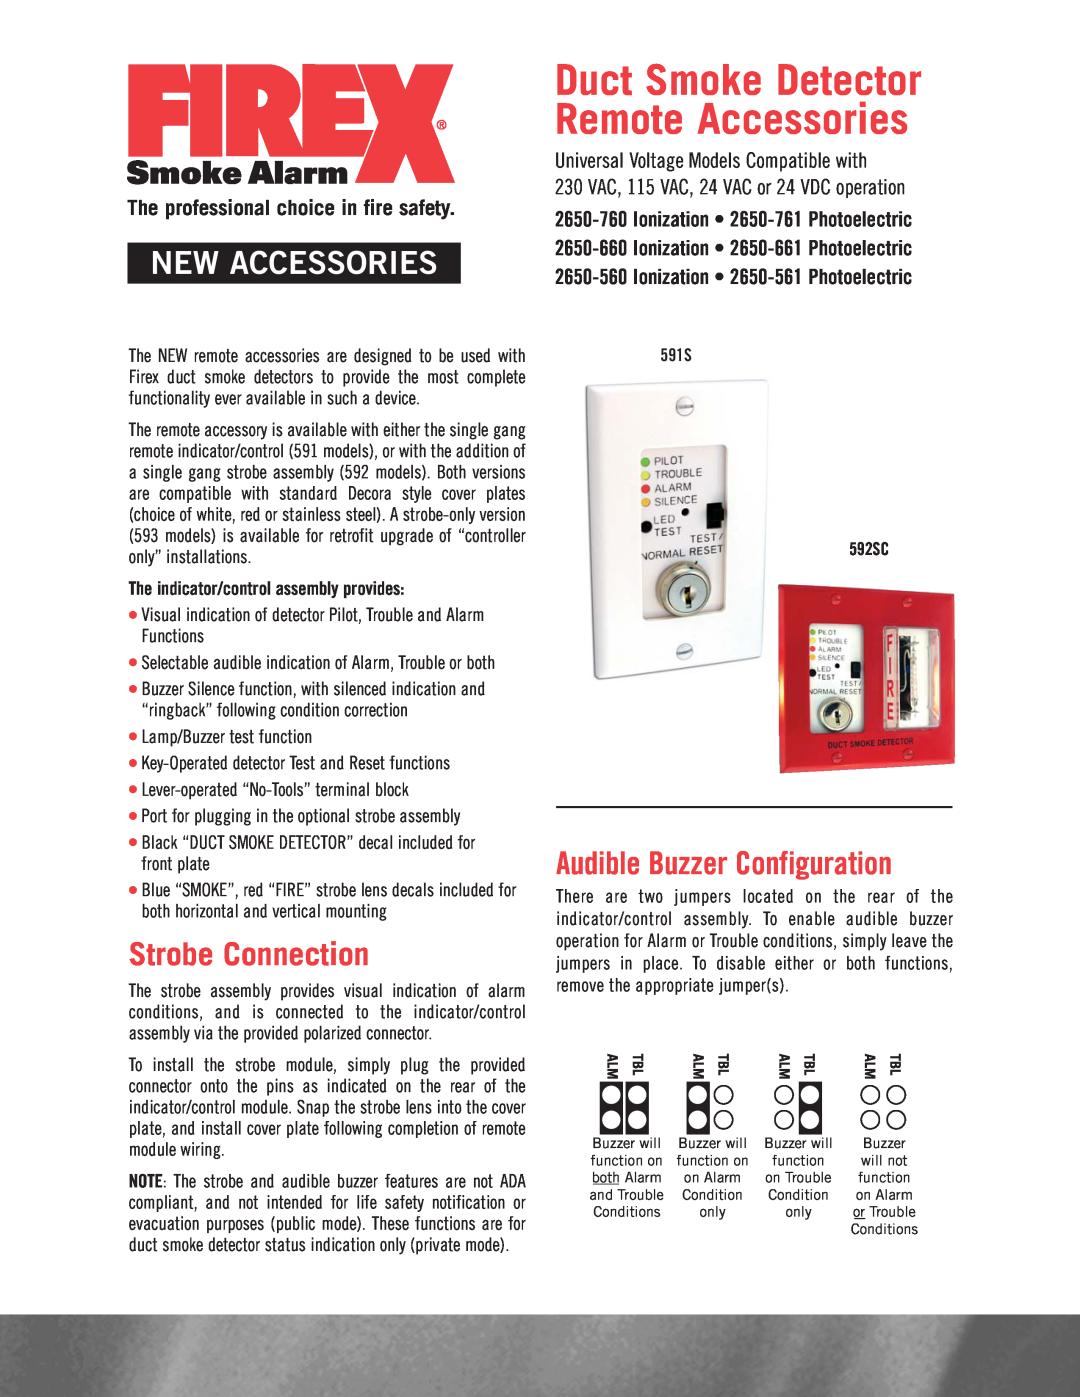 Firex 591S, 592SC manual The indicator/control assembly provides, Duct Smoke Detector Remote Accessories, New Accessories 